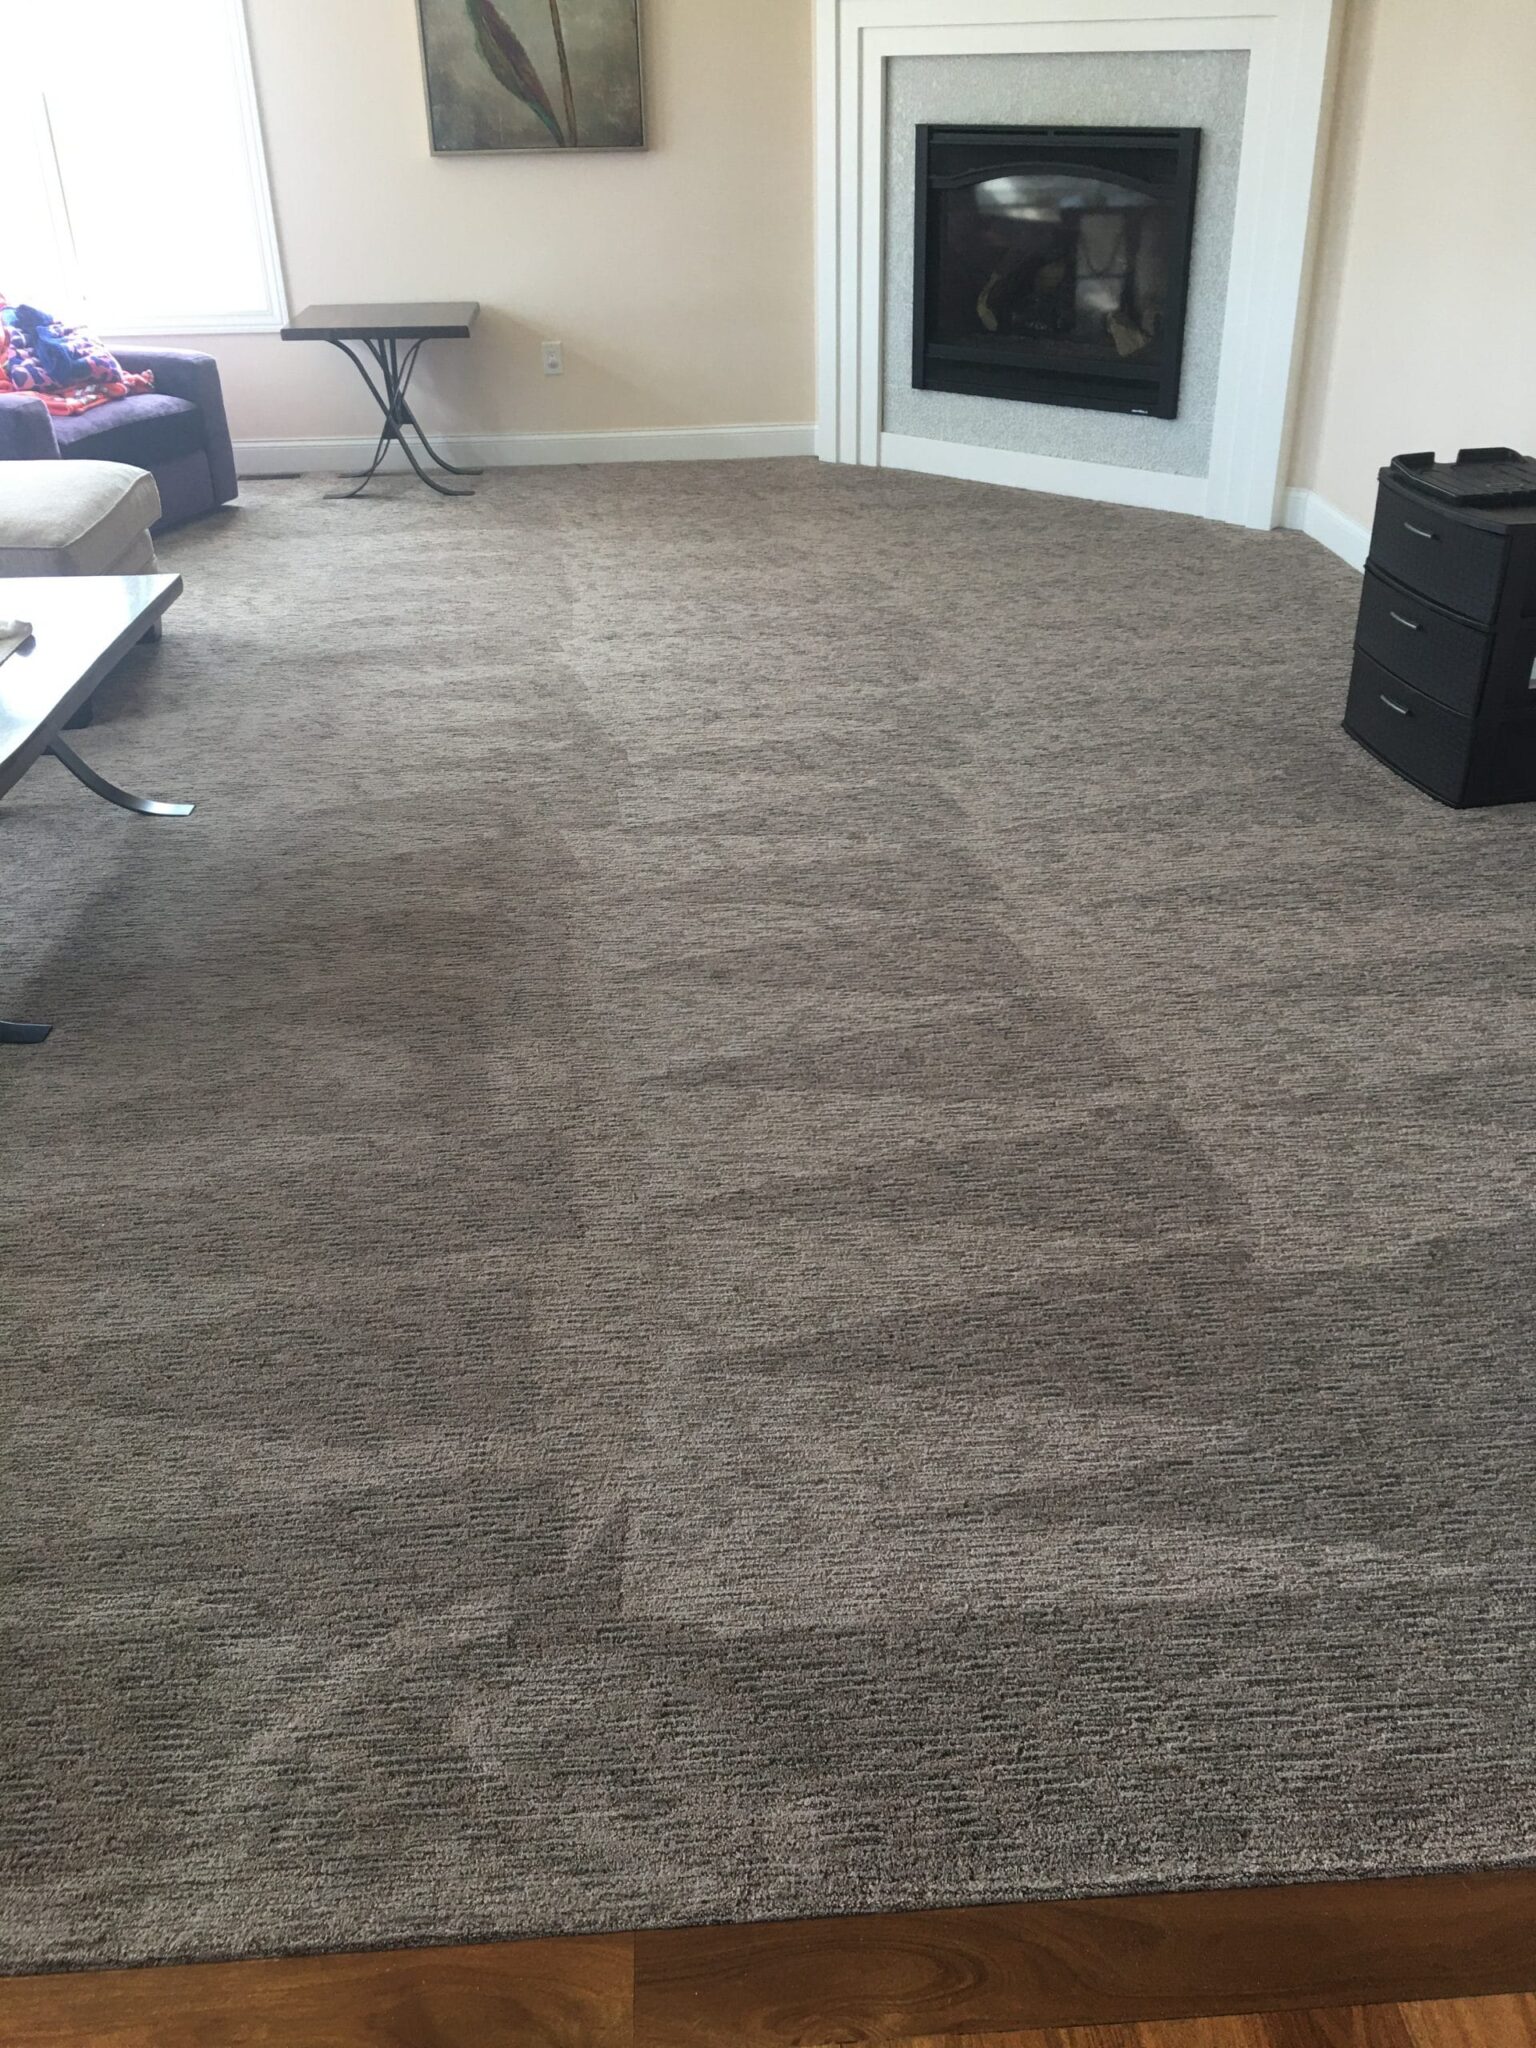 Commercial Flood Cleanup in Kenosha, best carpet cleaner in Racine, The Dry Guys flood cleanup